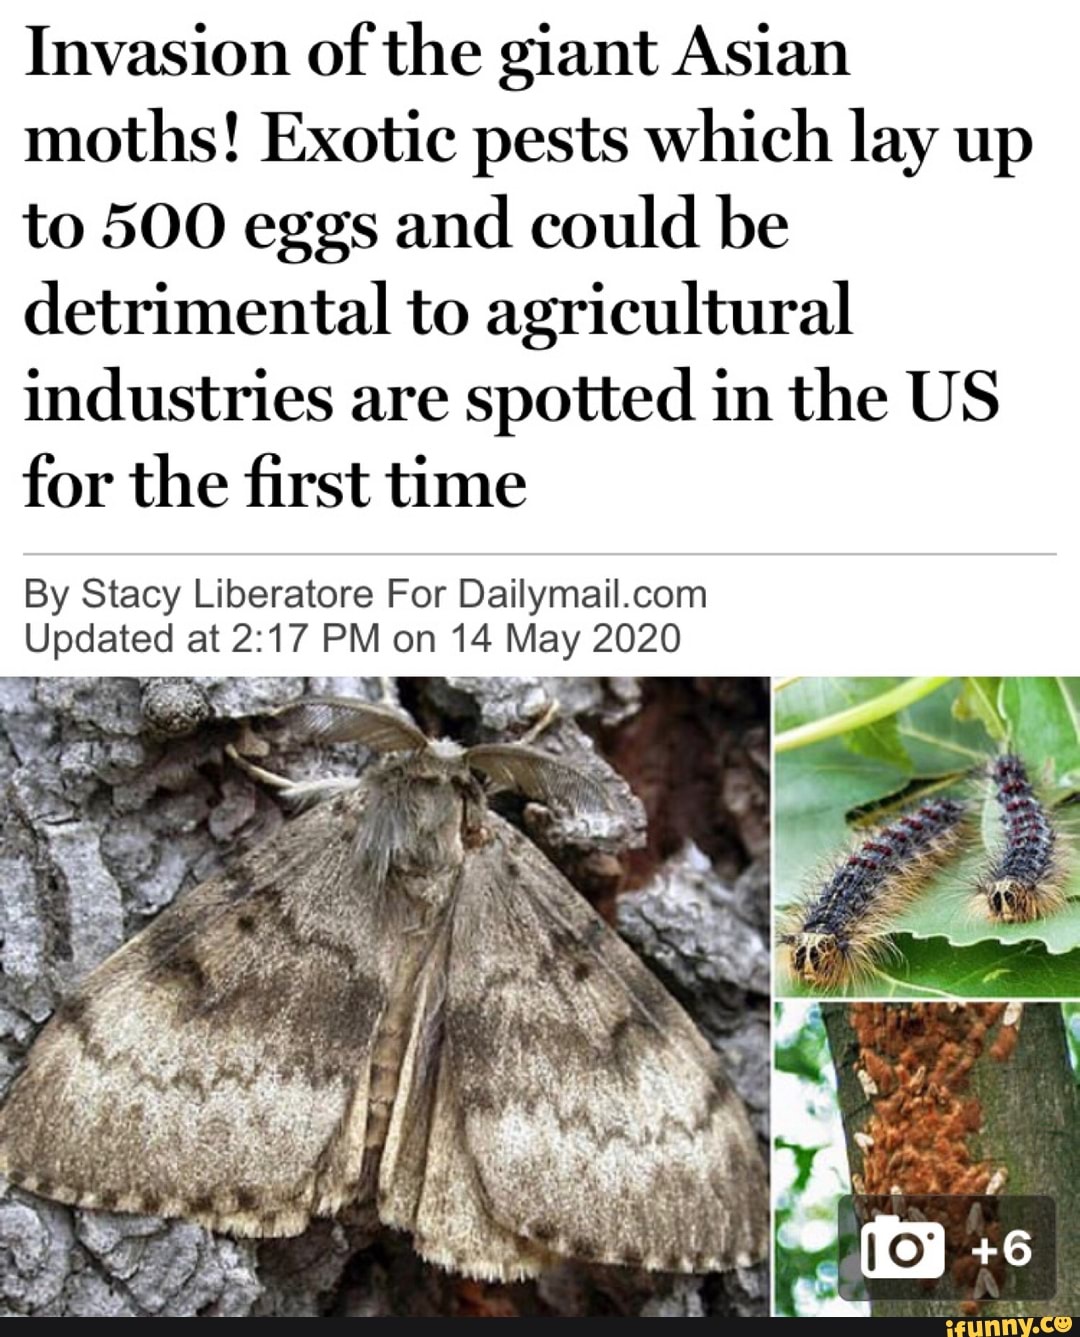 Invasion of the giant Asian moths! Exotic pests which lay up to 500